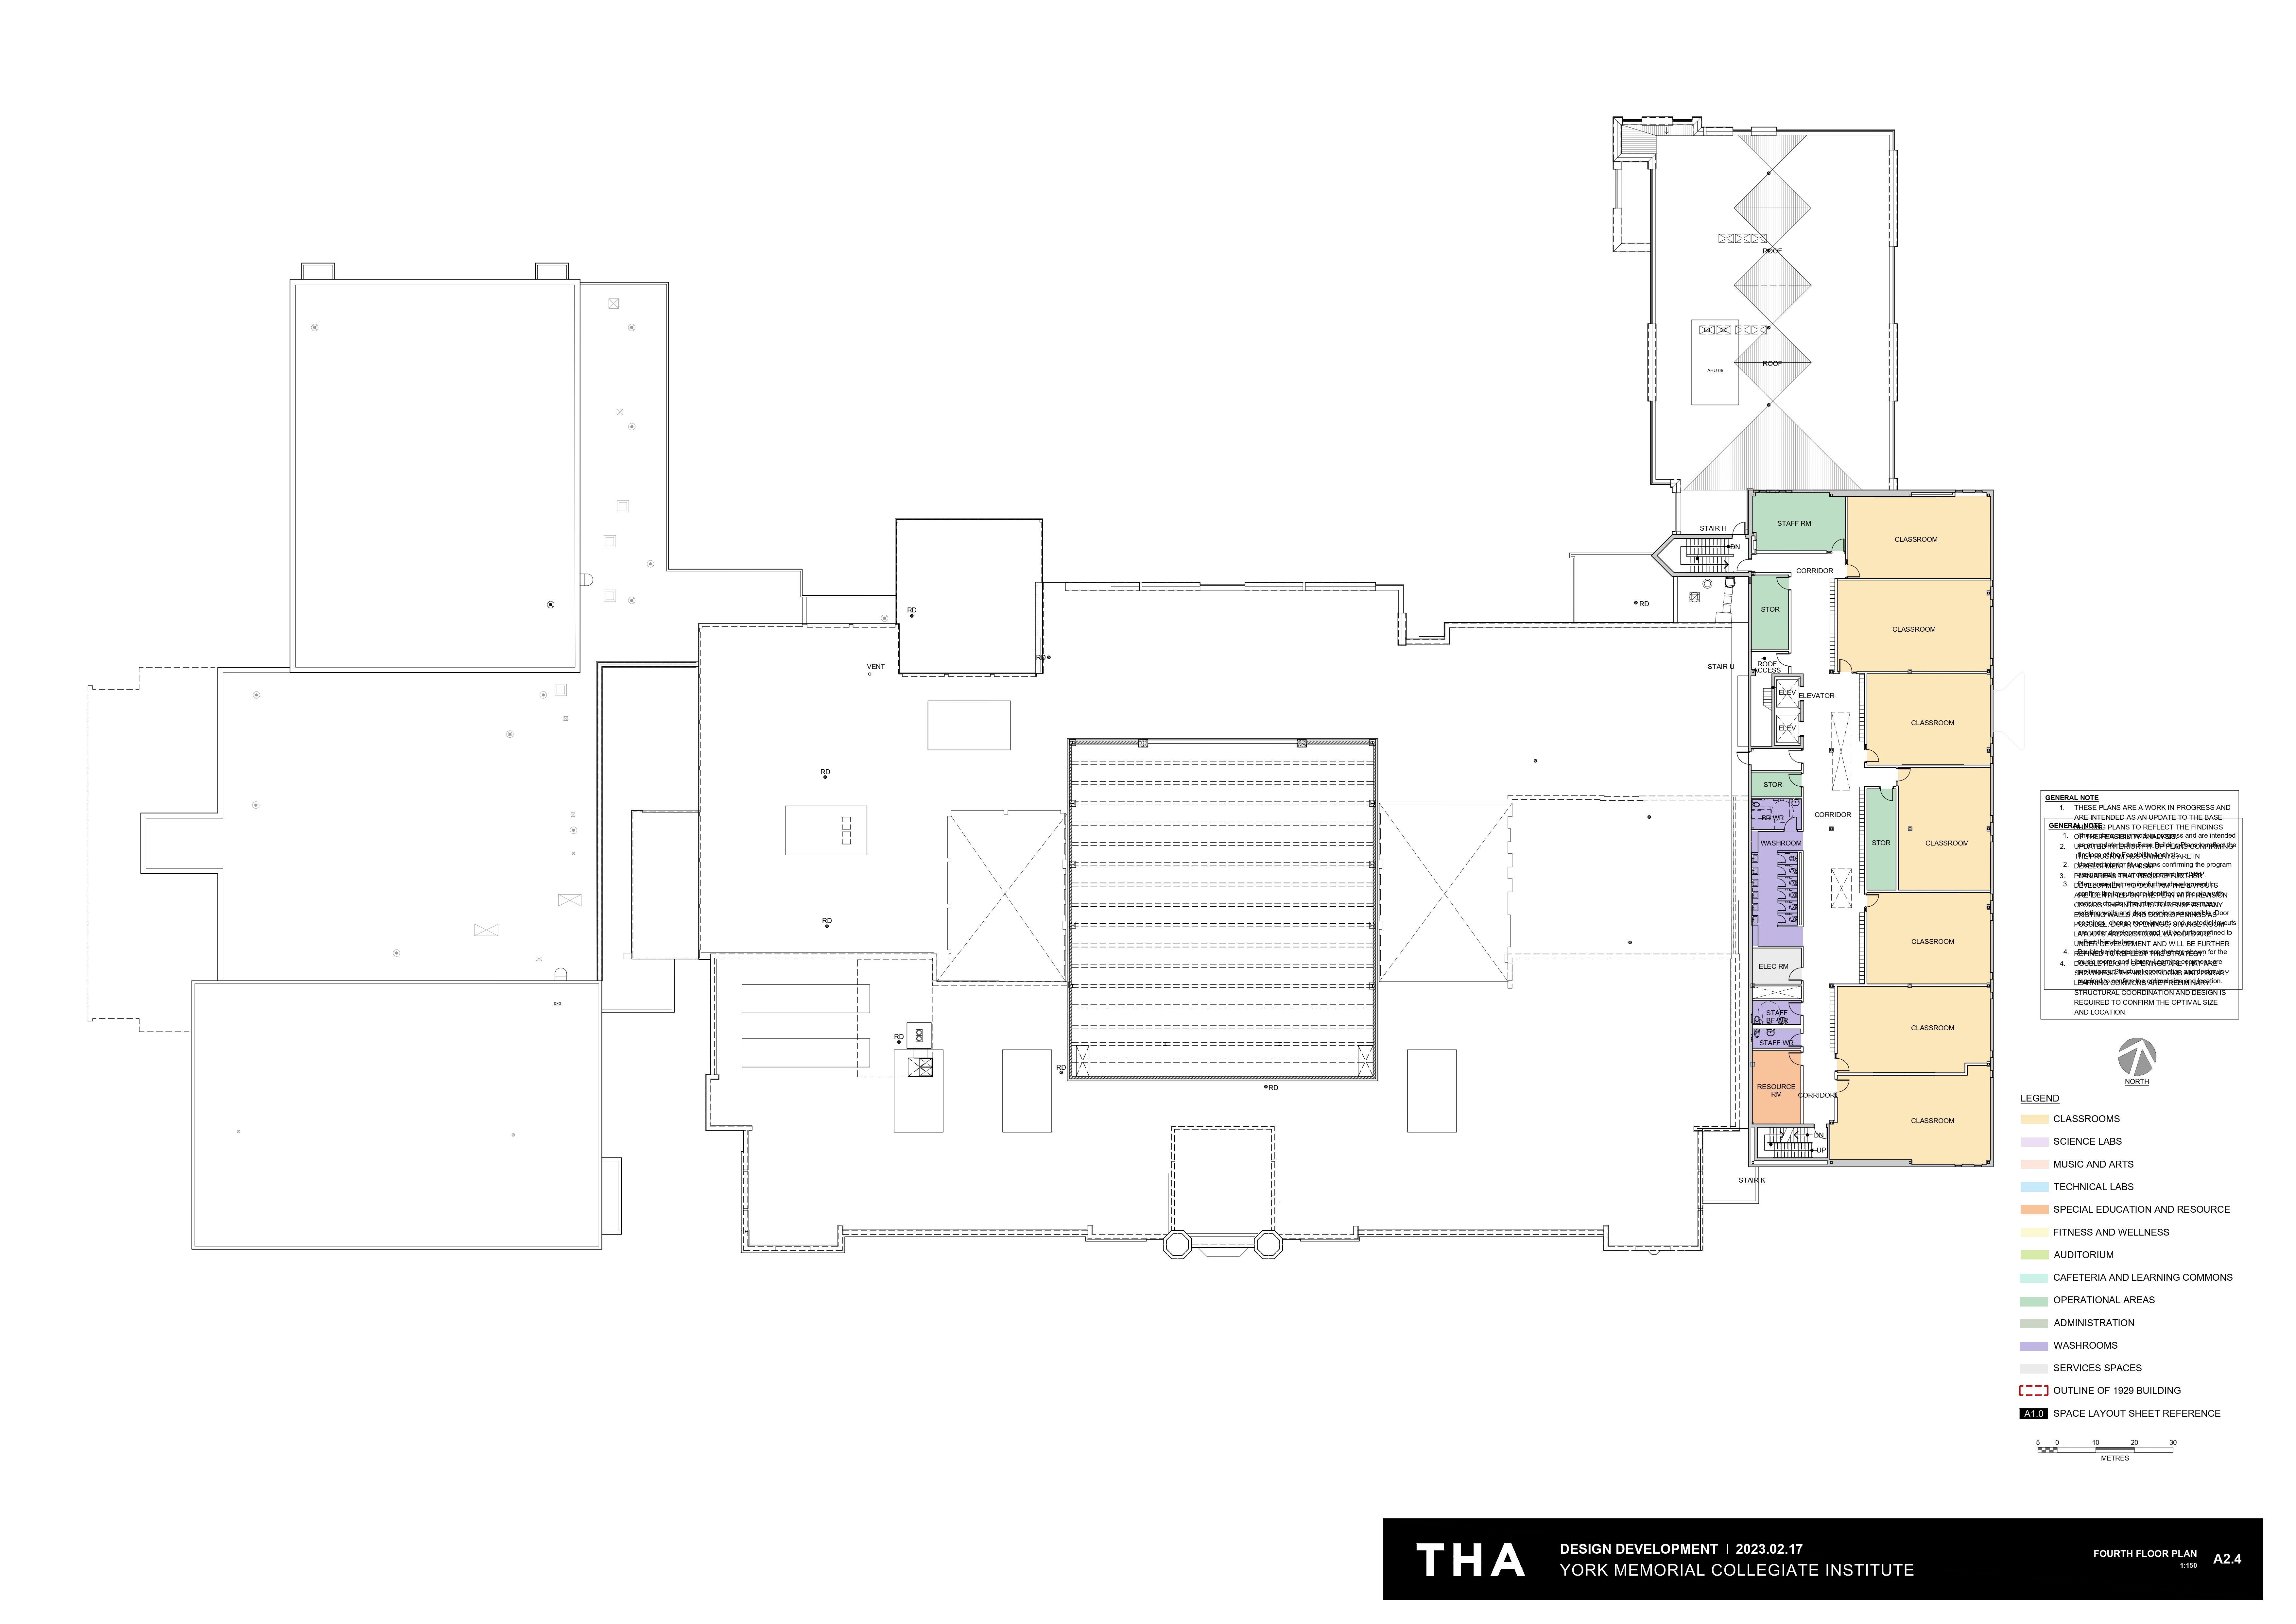 Architectural fourth floor plan looking down from above depicting instructional & operations spaces situated on the first floor after the project is completed. Open Gallery